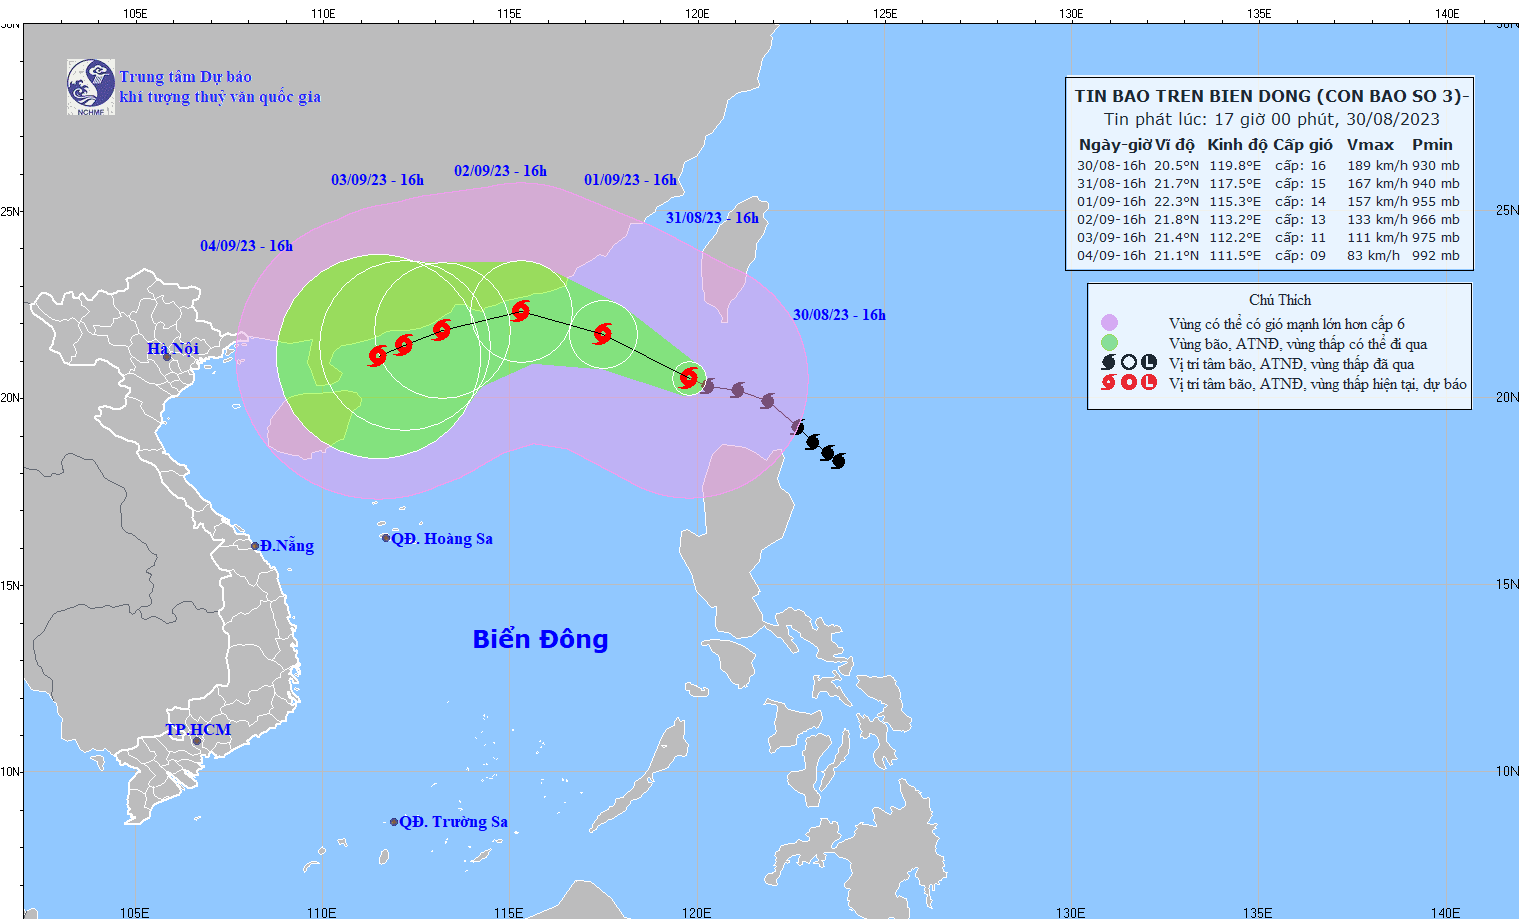 Typhoon Saola entered East Vietnam Sea in the afternoon of 30-August-2023 becoming the No. 3 Typhoon in Vietnam in 2023